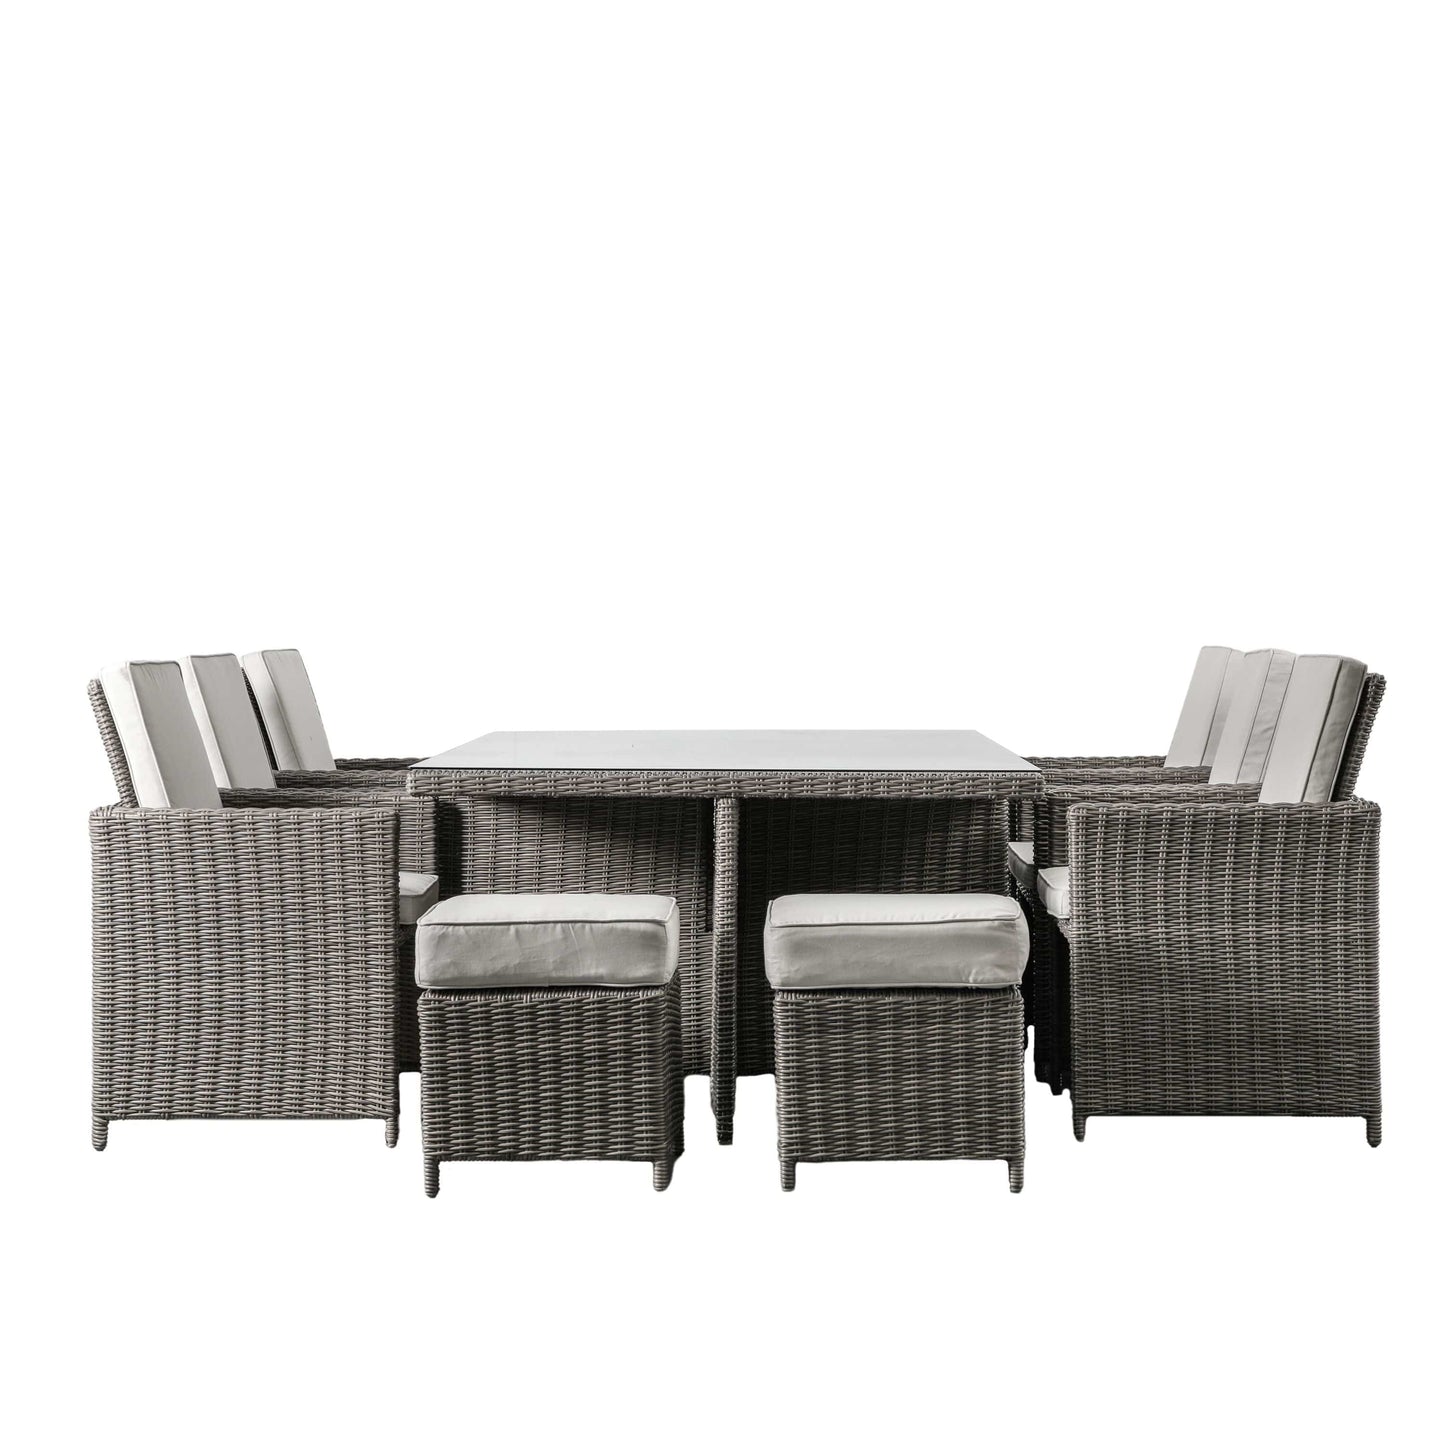 Rondin 10 Seater Cube Dining Set - Colour Options